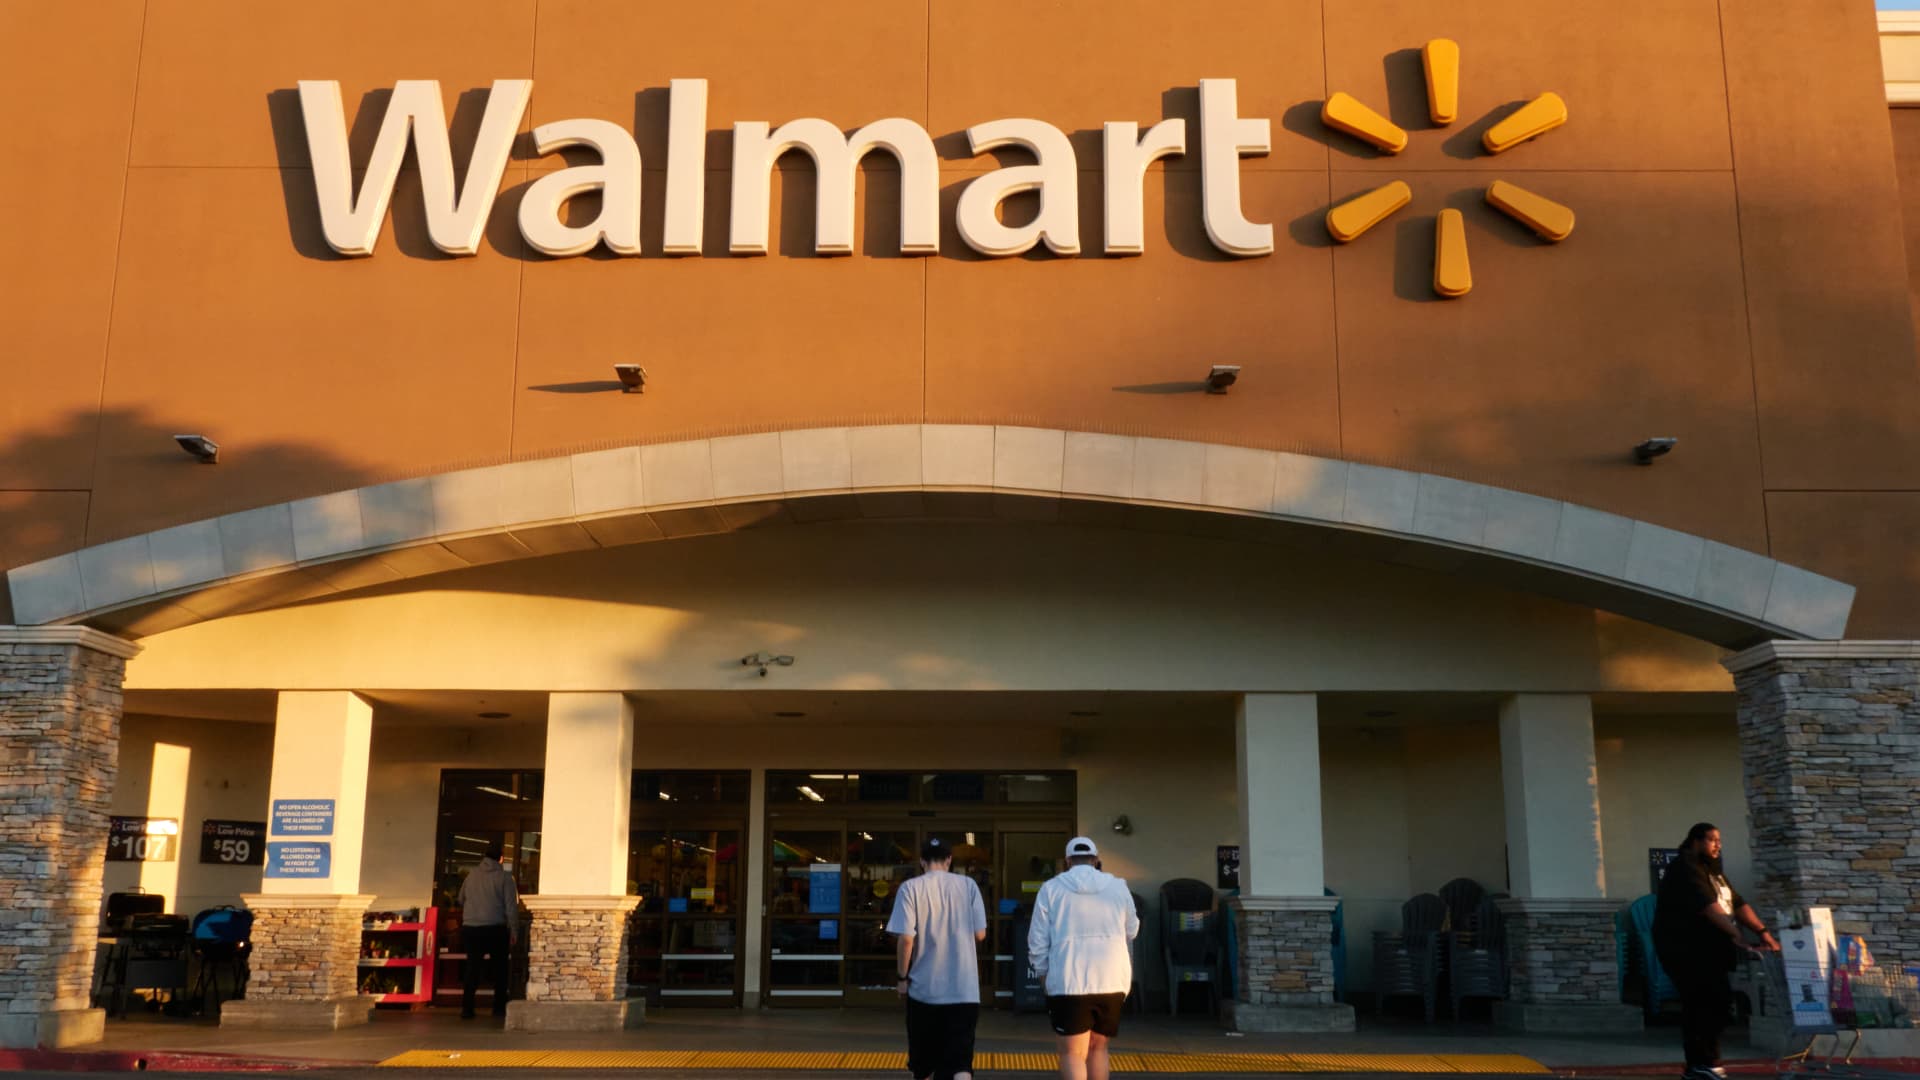 Walmart expands abortion coverage for employees after Roe v Wade